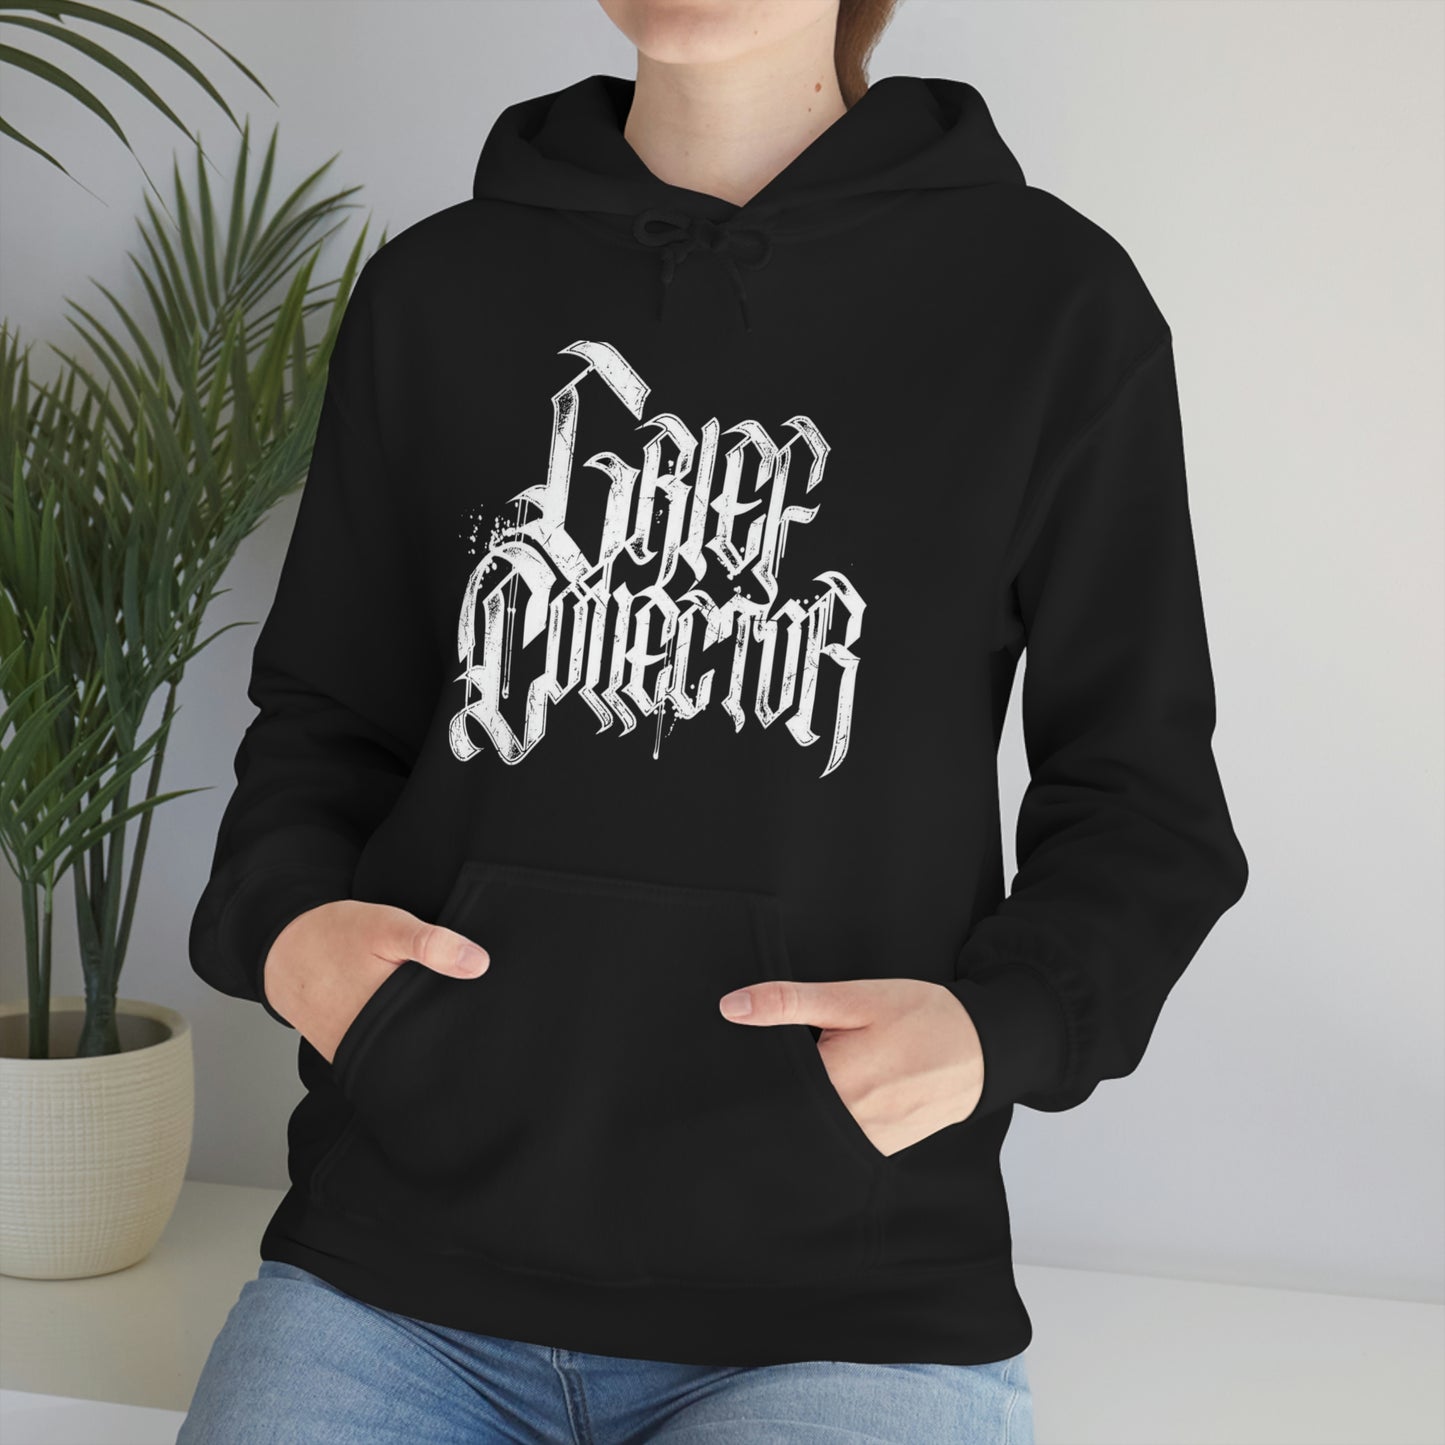 Grief Collector - In Times of Woe Hooded Sweatshirt